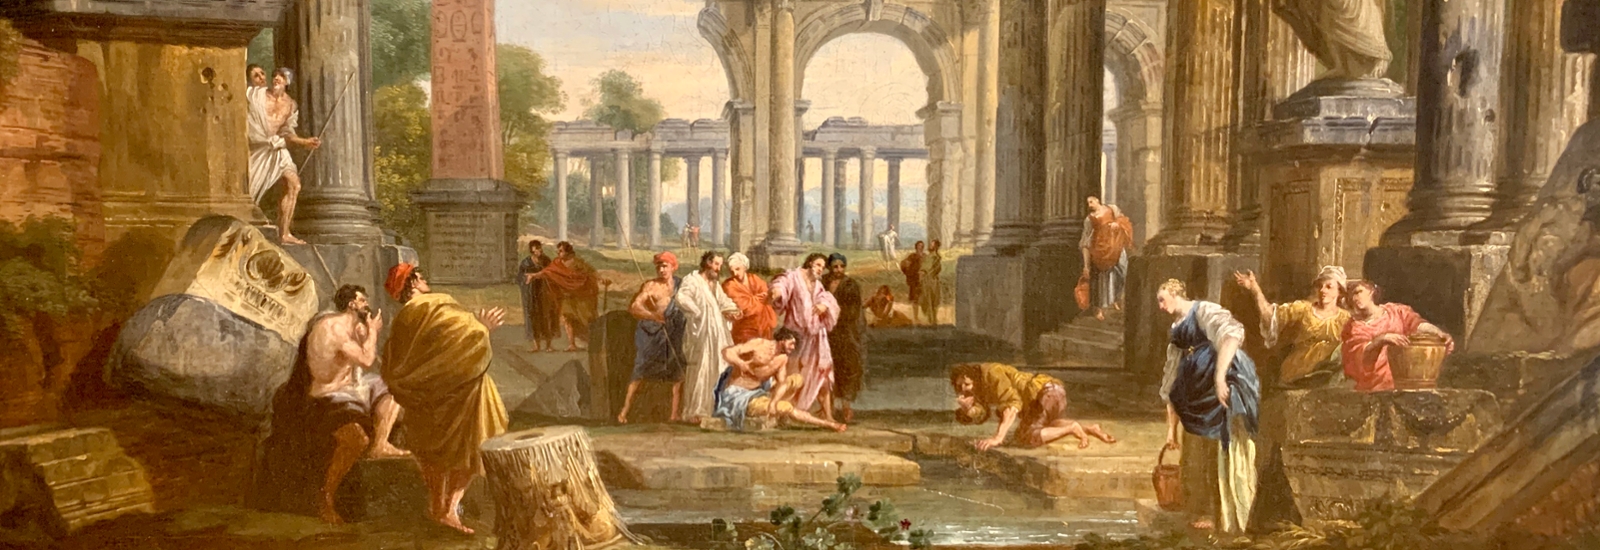 painting of classical ruins with christ healing the lame at the pool of bethesda